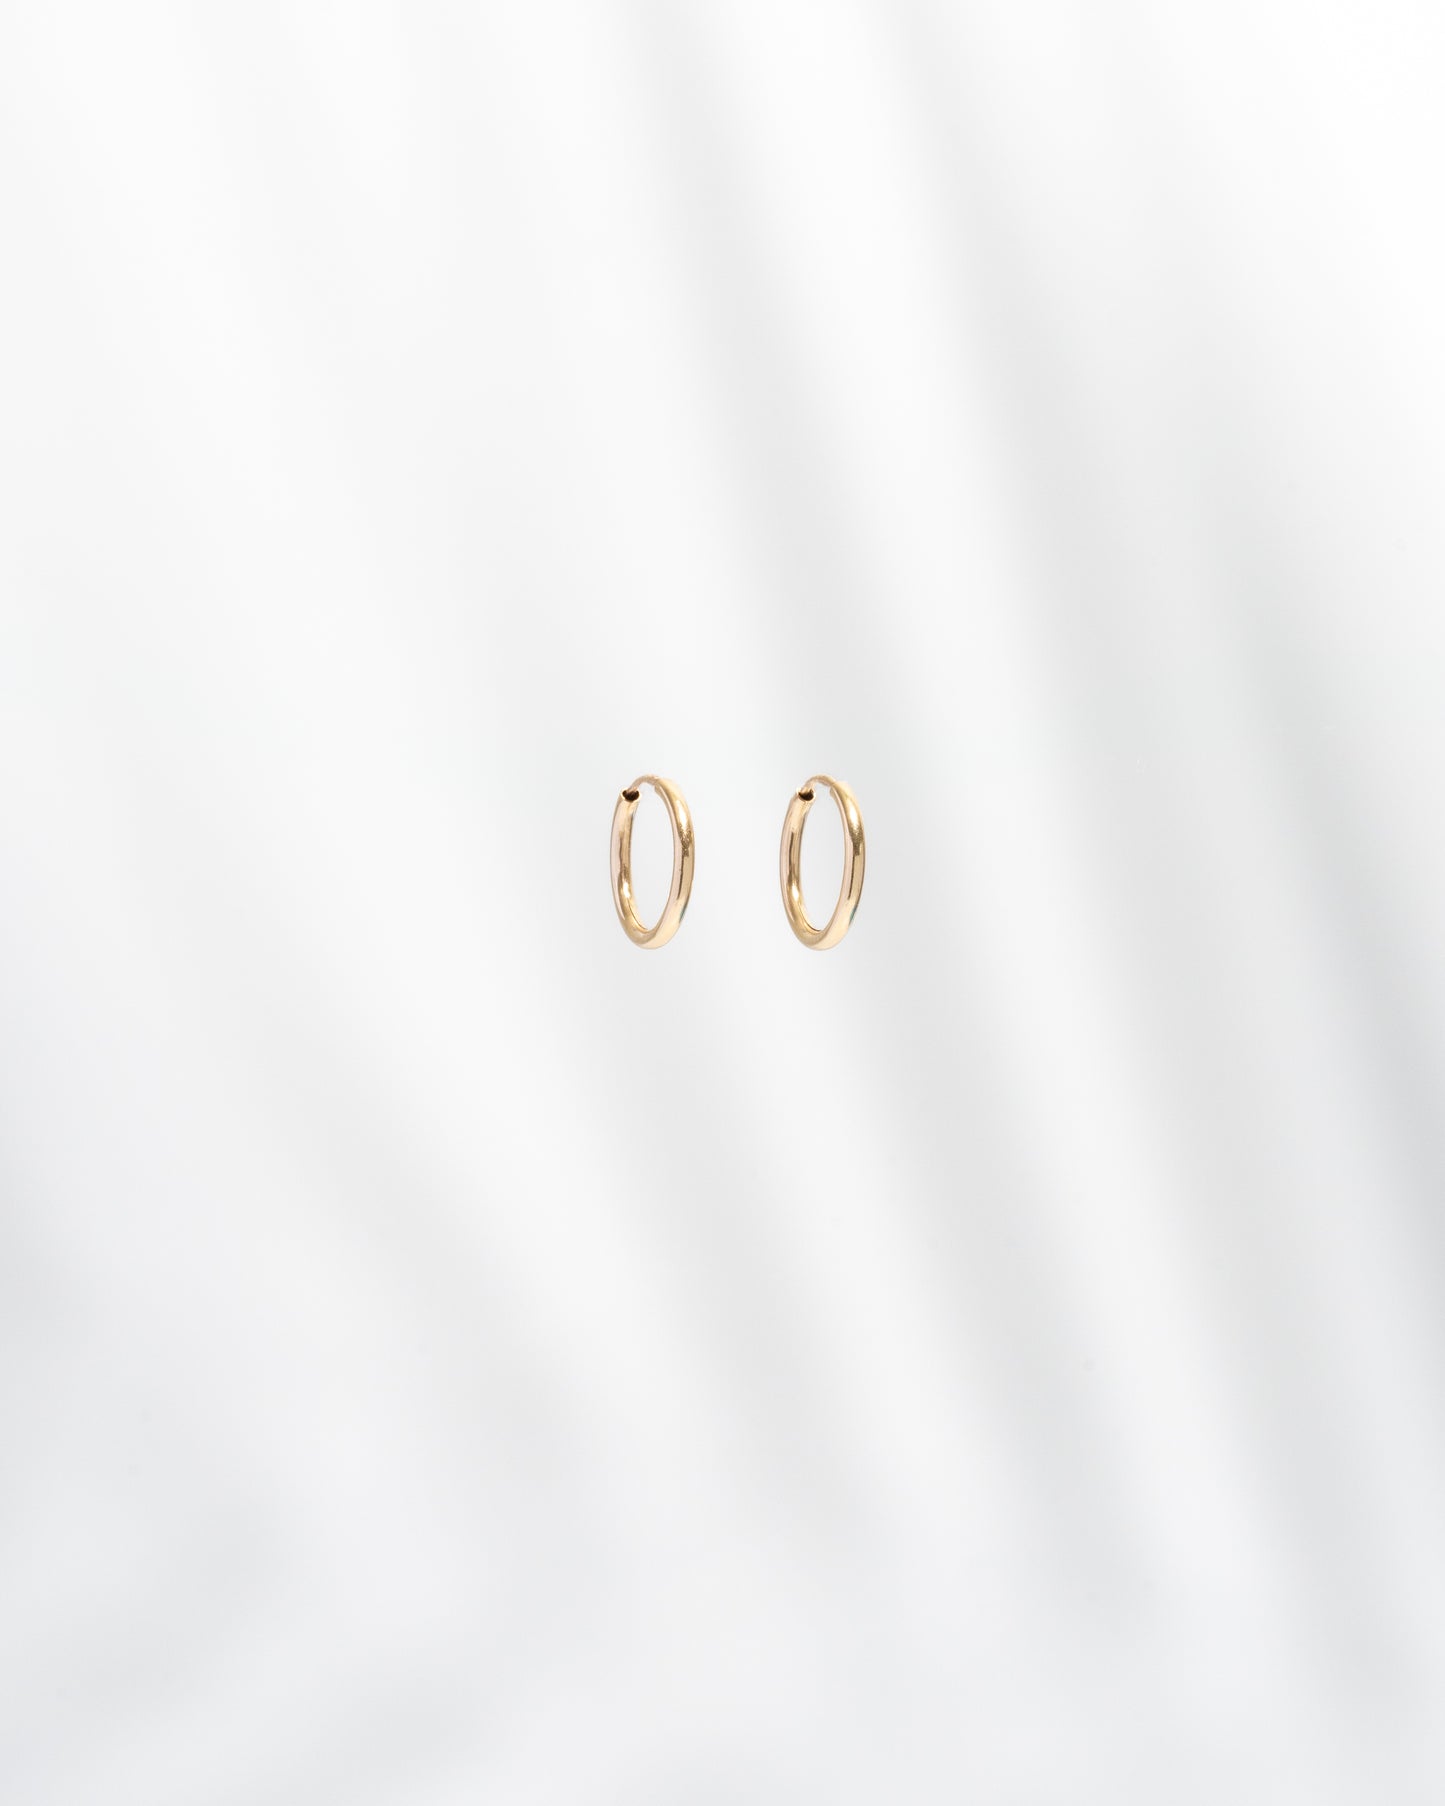 Everyday gold hoops (multiple sizes available)